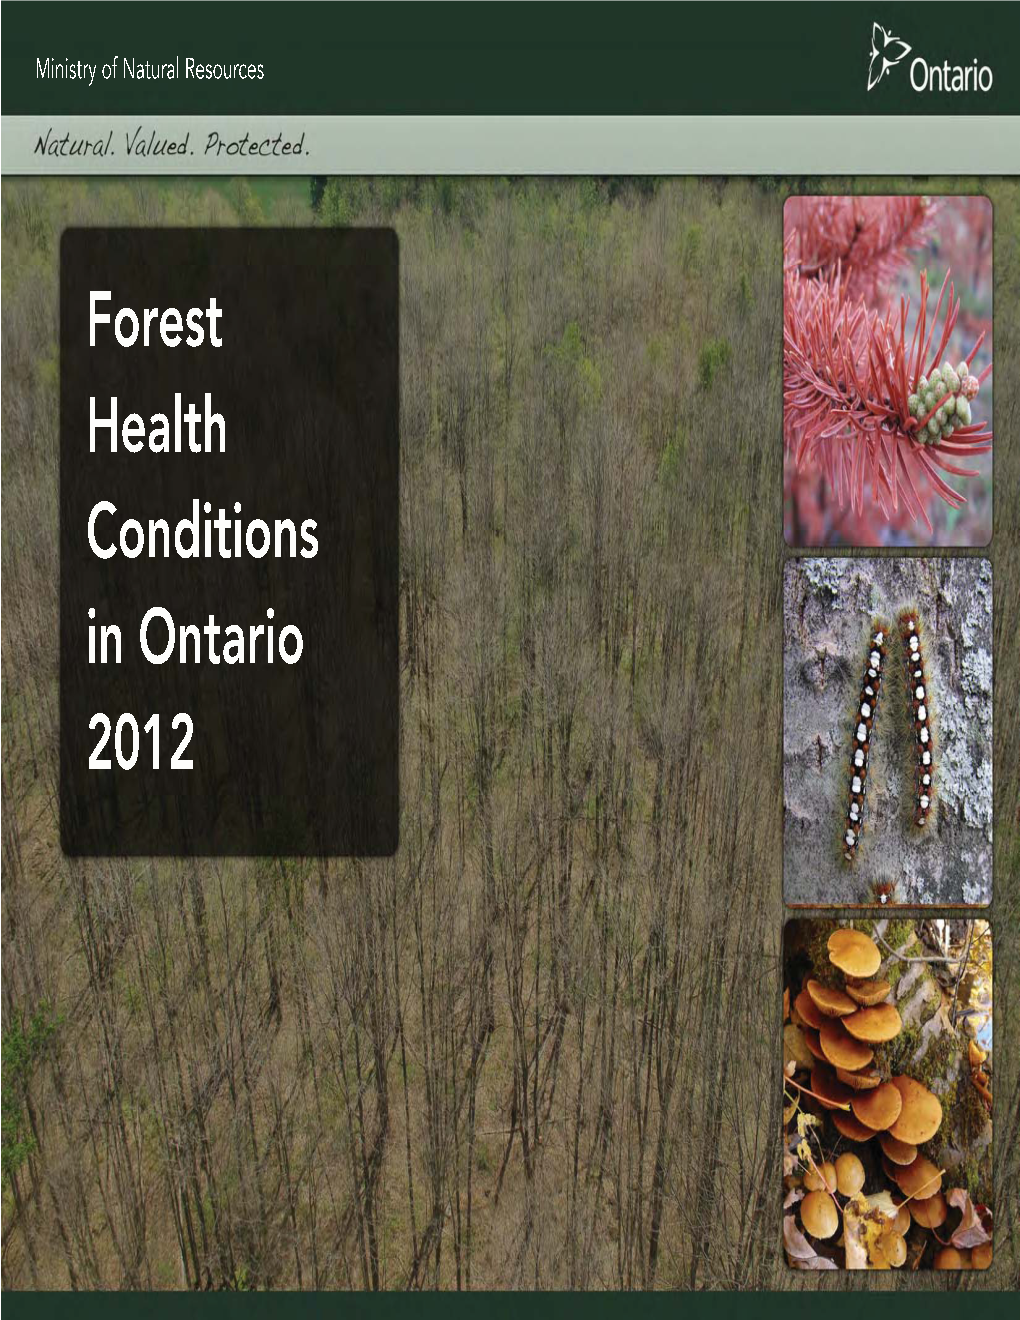 Forest Health Conditions in Ontario, 2012